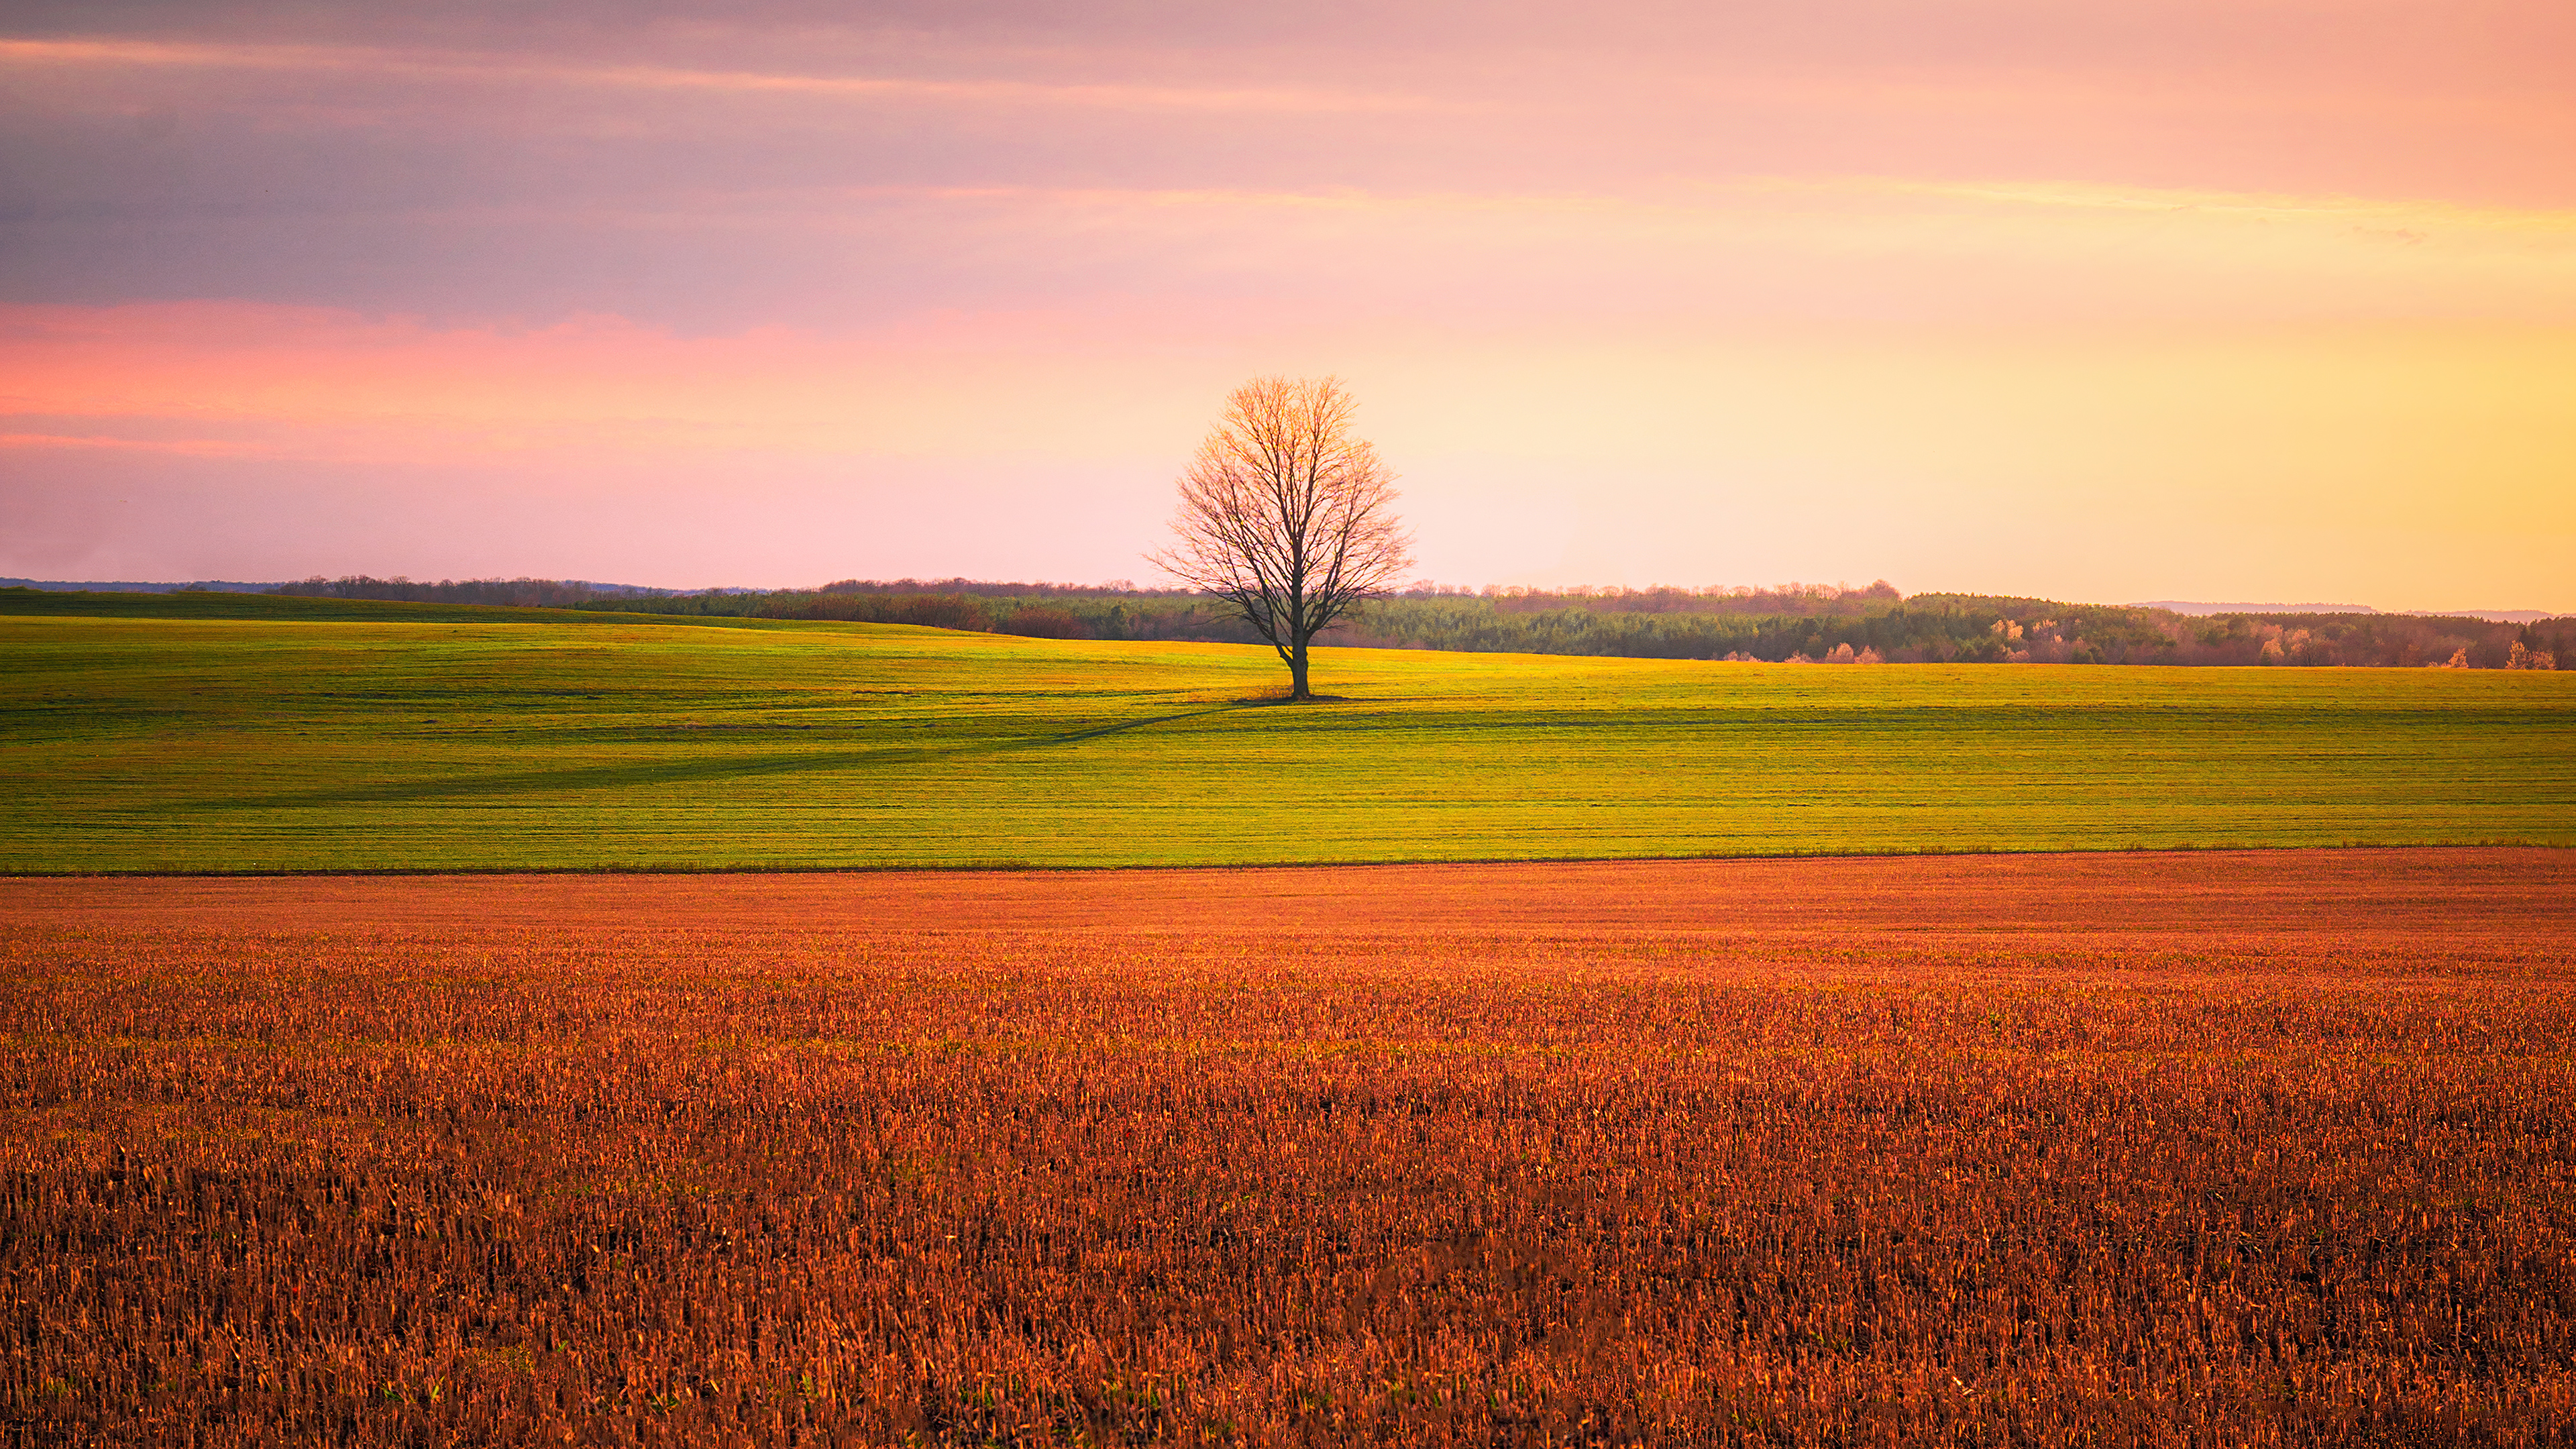 Tree In The Field Wallpapers